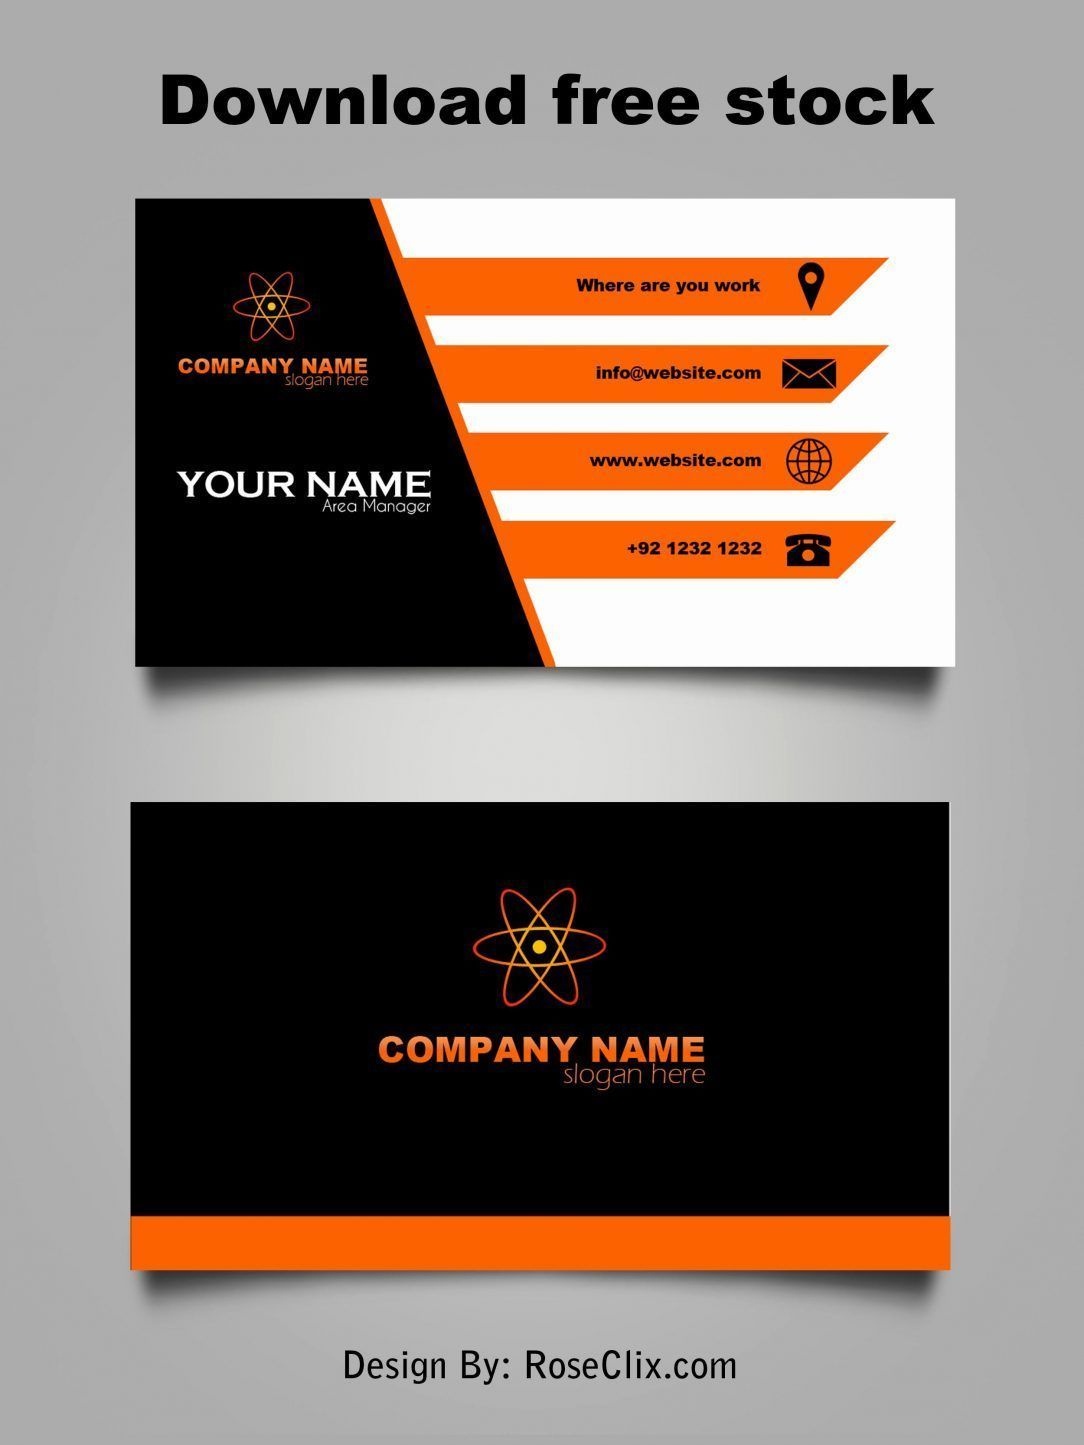 Make Your Custom Free Business Card Printable No Download For Free - Free Printable Cards No Download Required